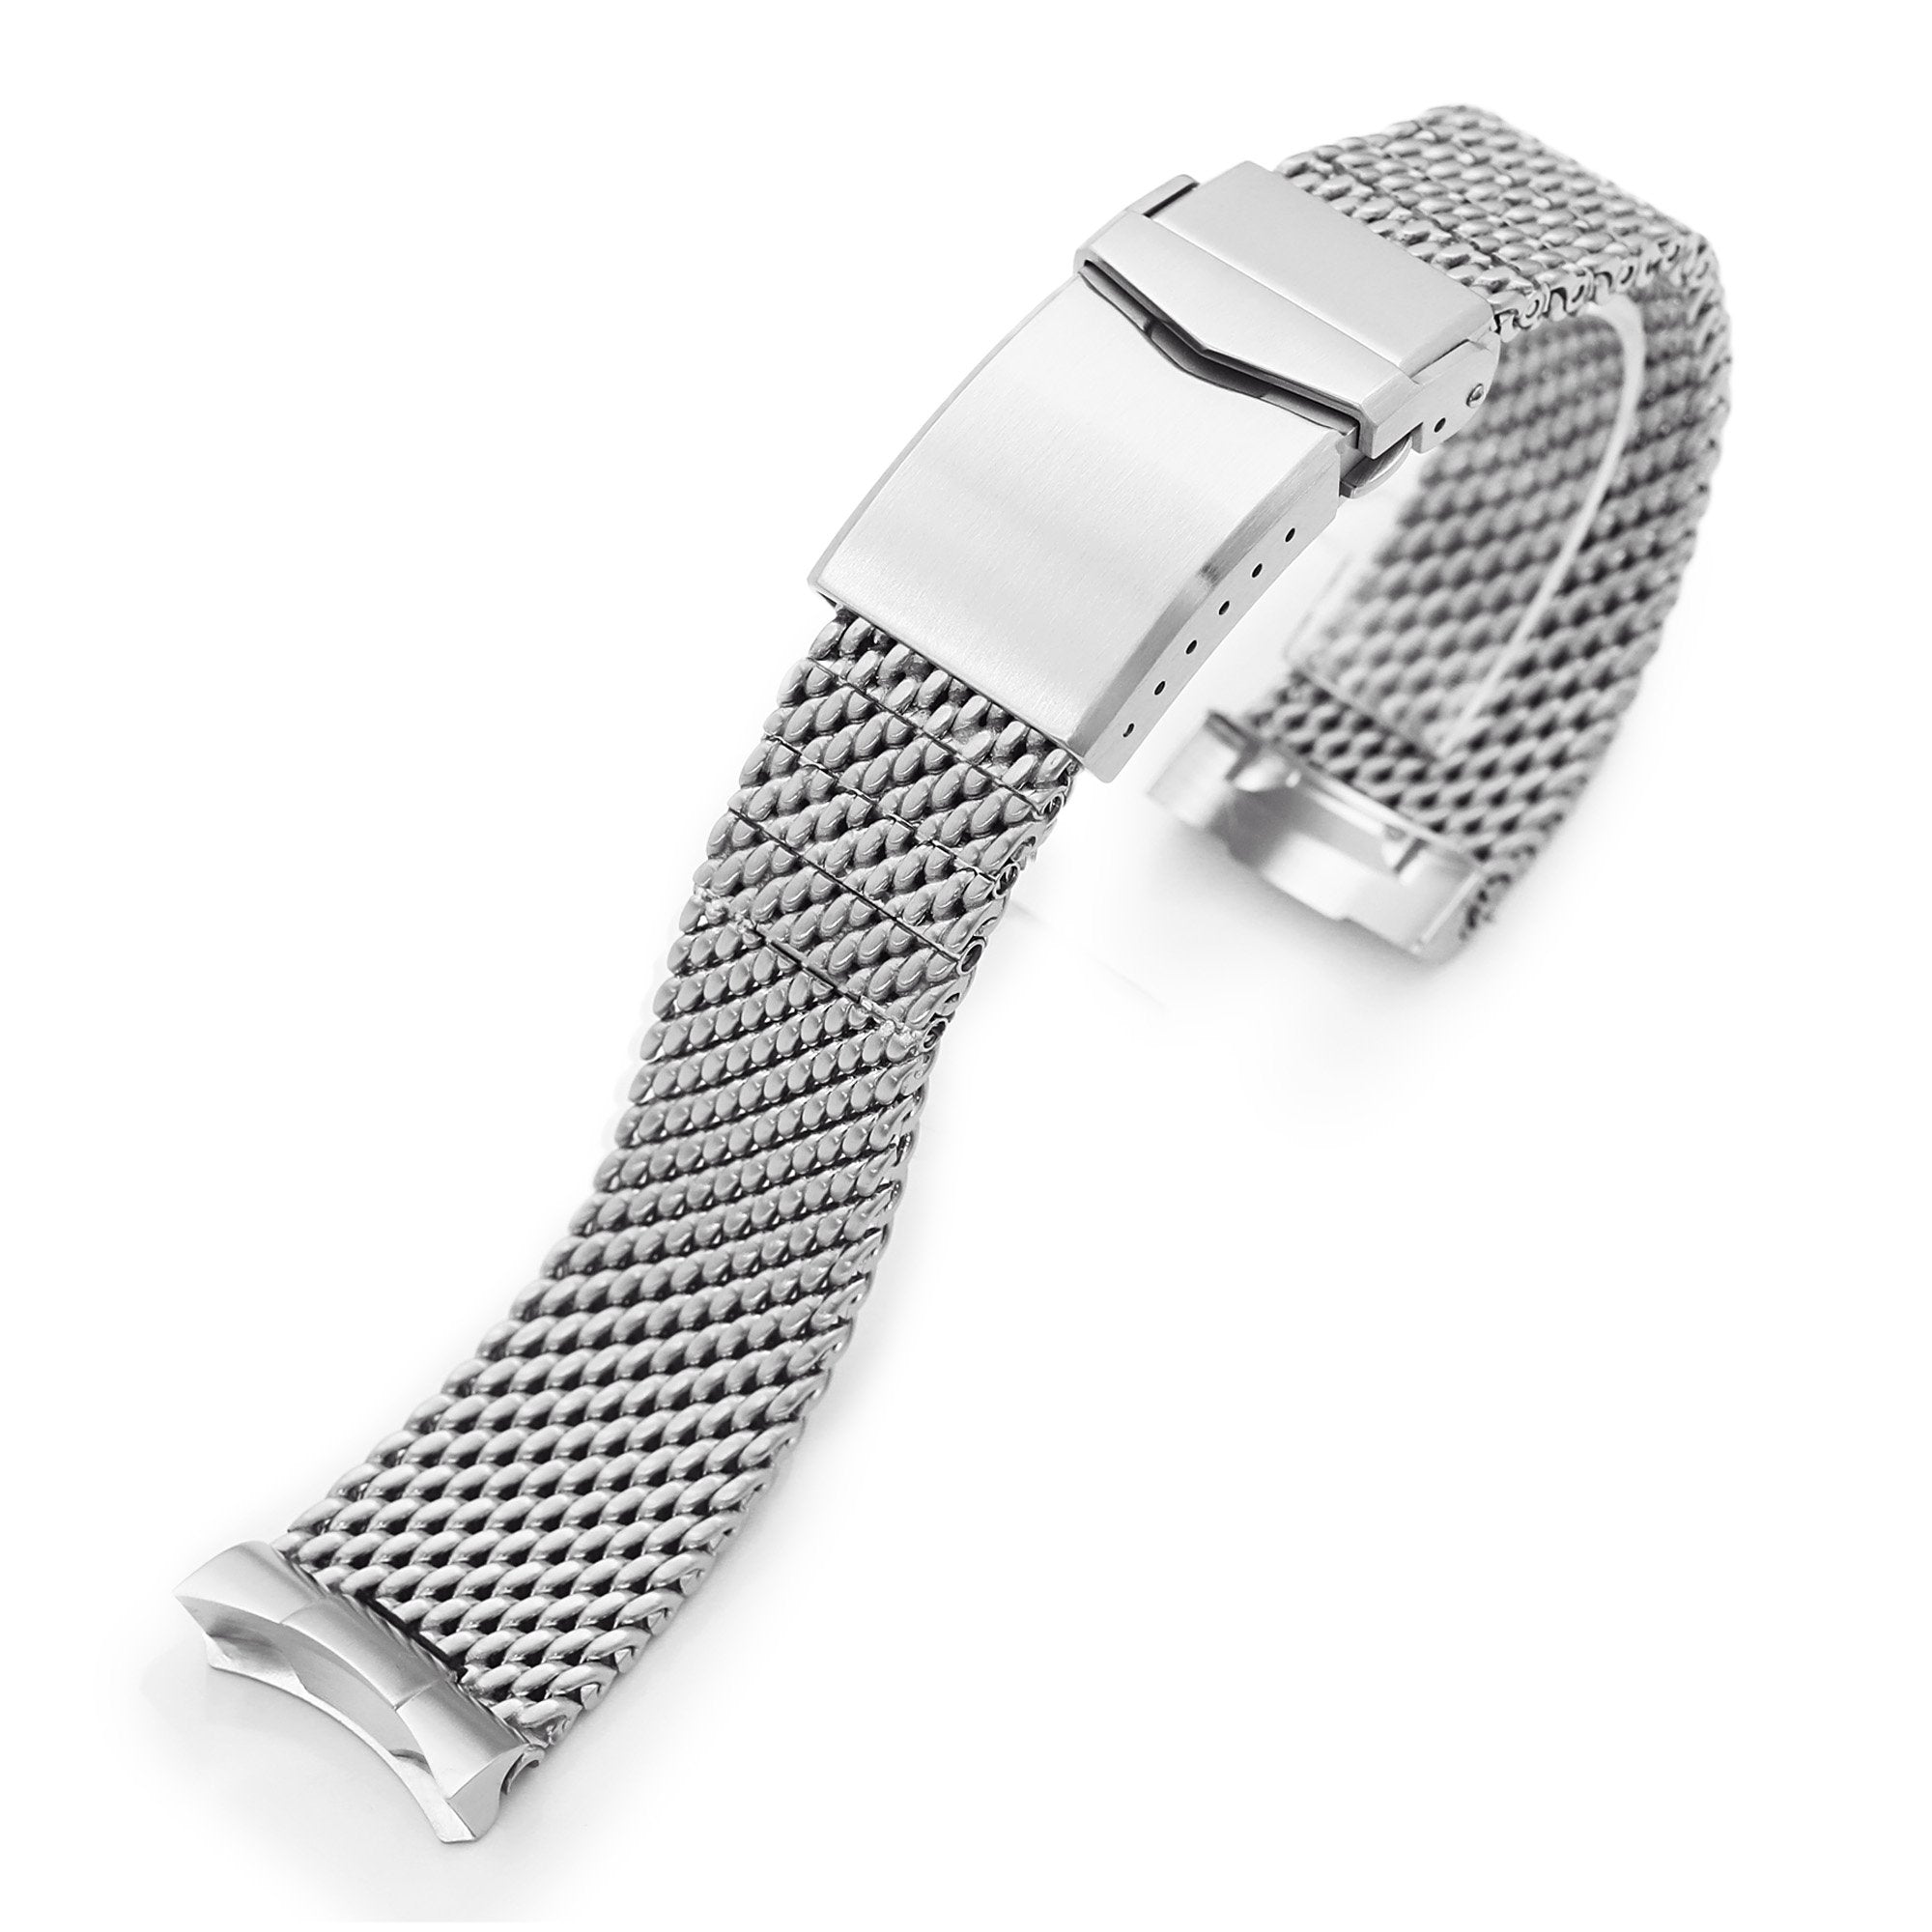 Curved Endlink Massy Mesh Watch Bands for Seiko SKX007 Mod | Strapcode